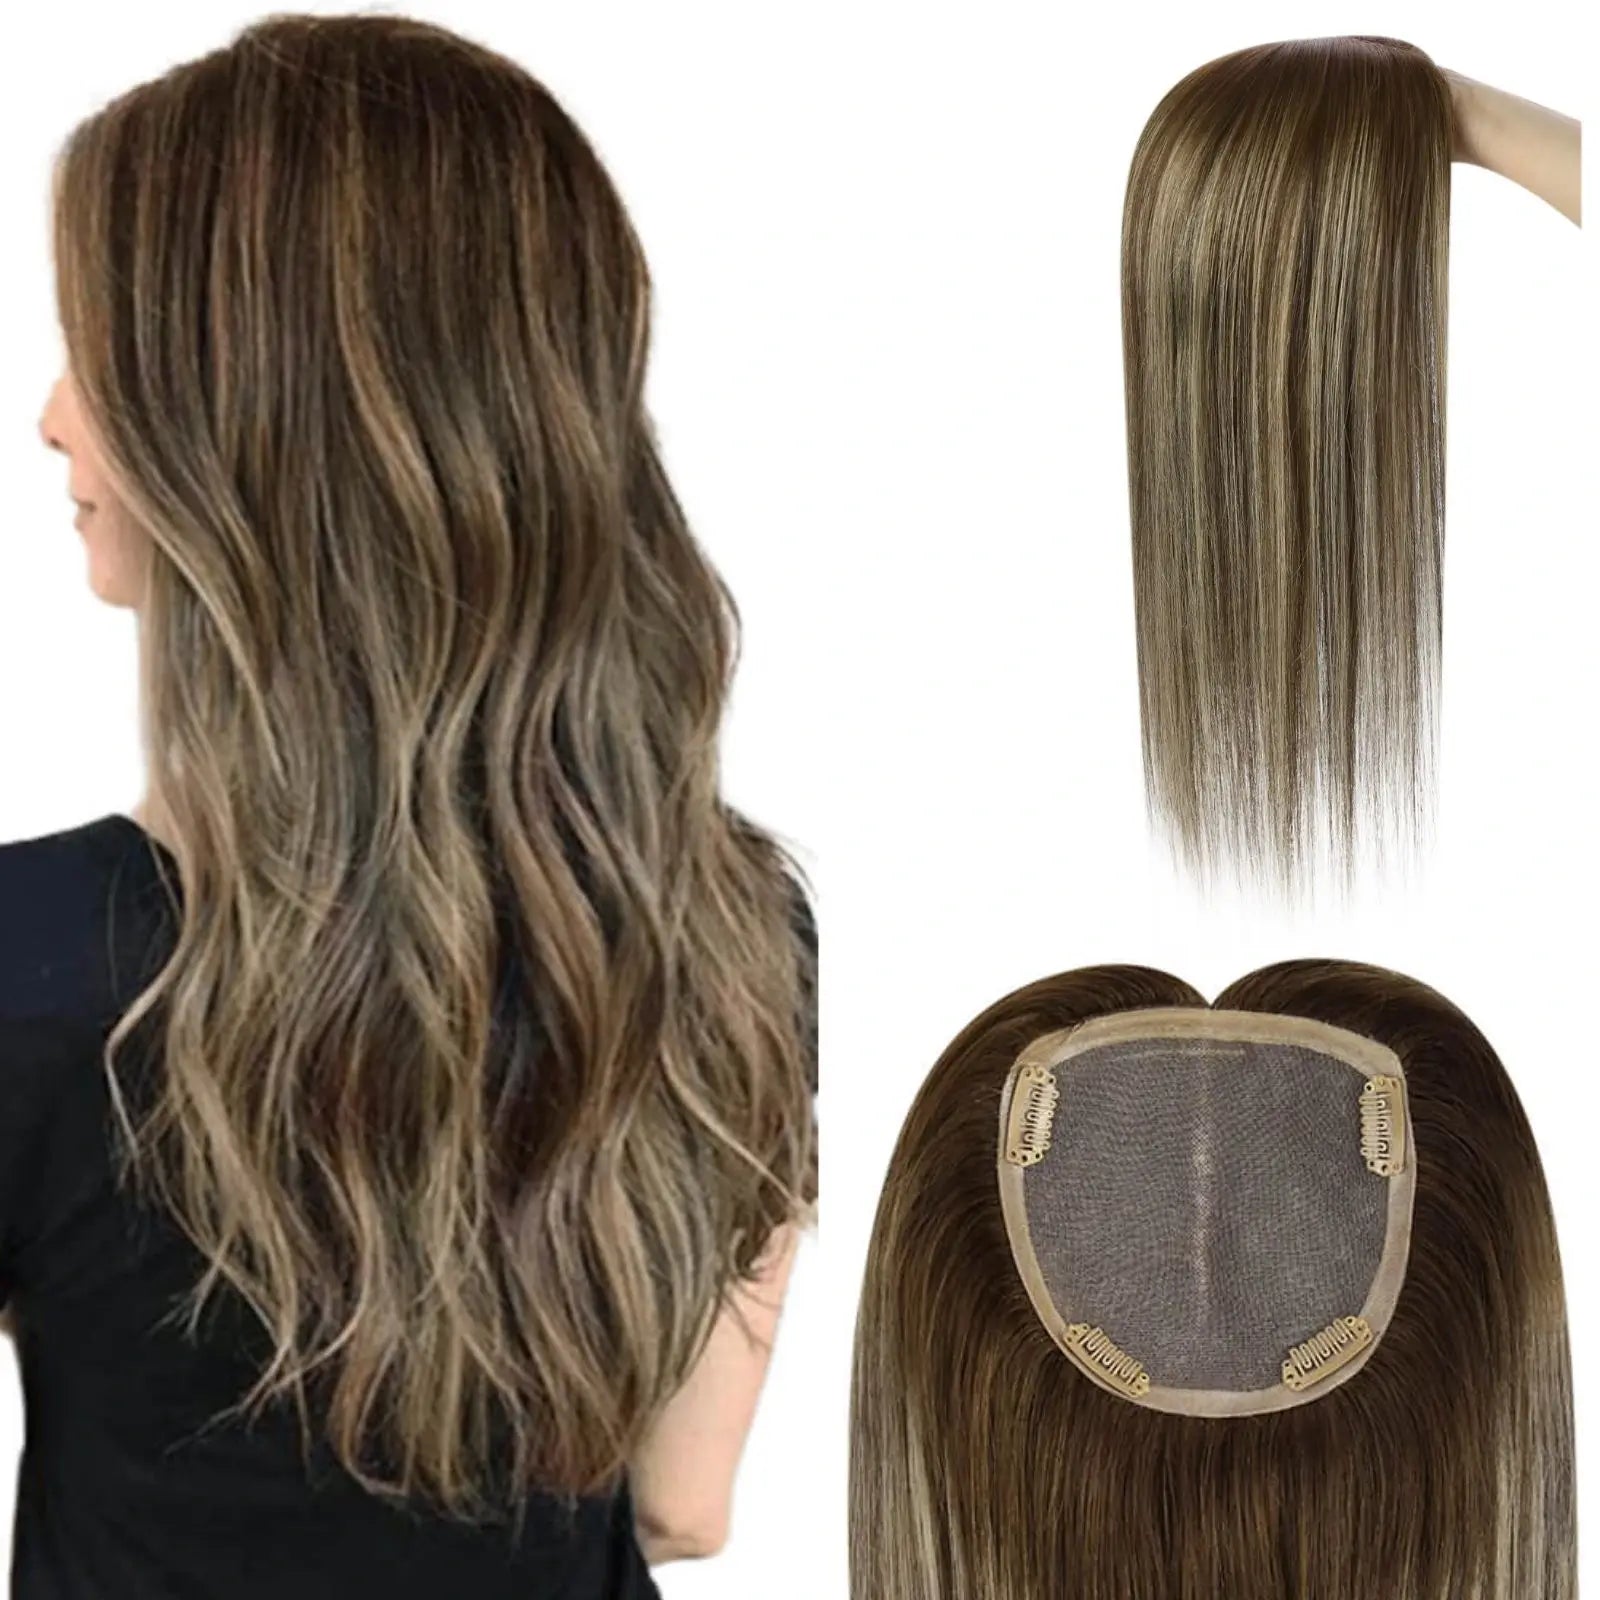 Clip On Human Hair Topper For Thinning Hair Balayage Ombre Brown Blonde Hair